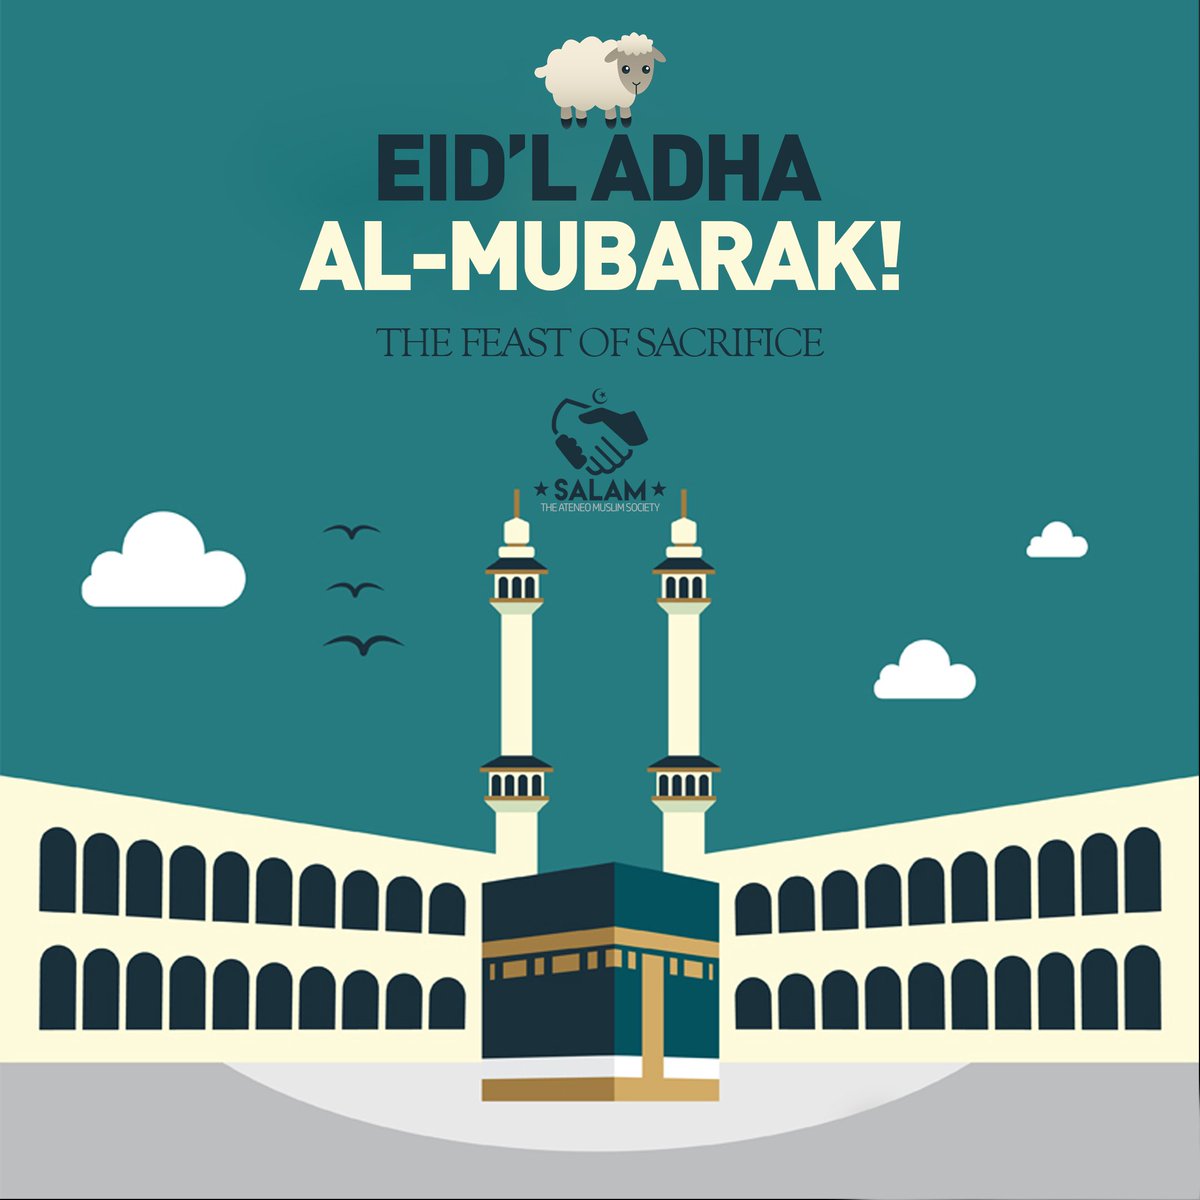 From our community to yours, #EidlAdha Al-Mubarak! 🌙
May this blessed event bring us peace, joy and happiness.

@ADDU_Official